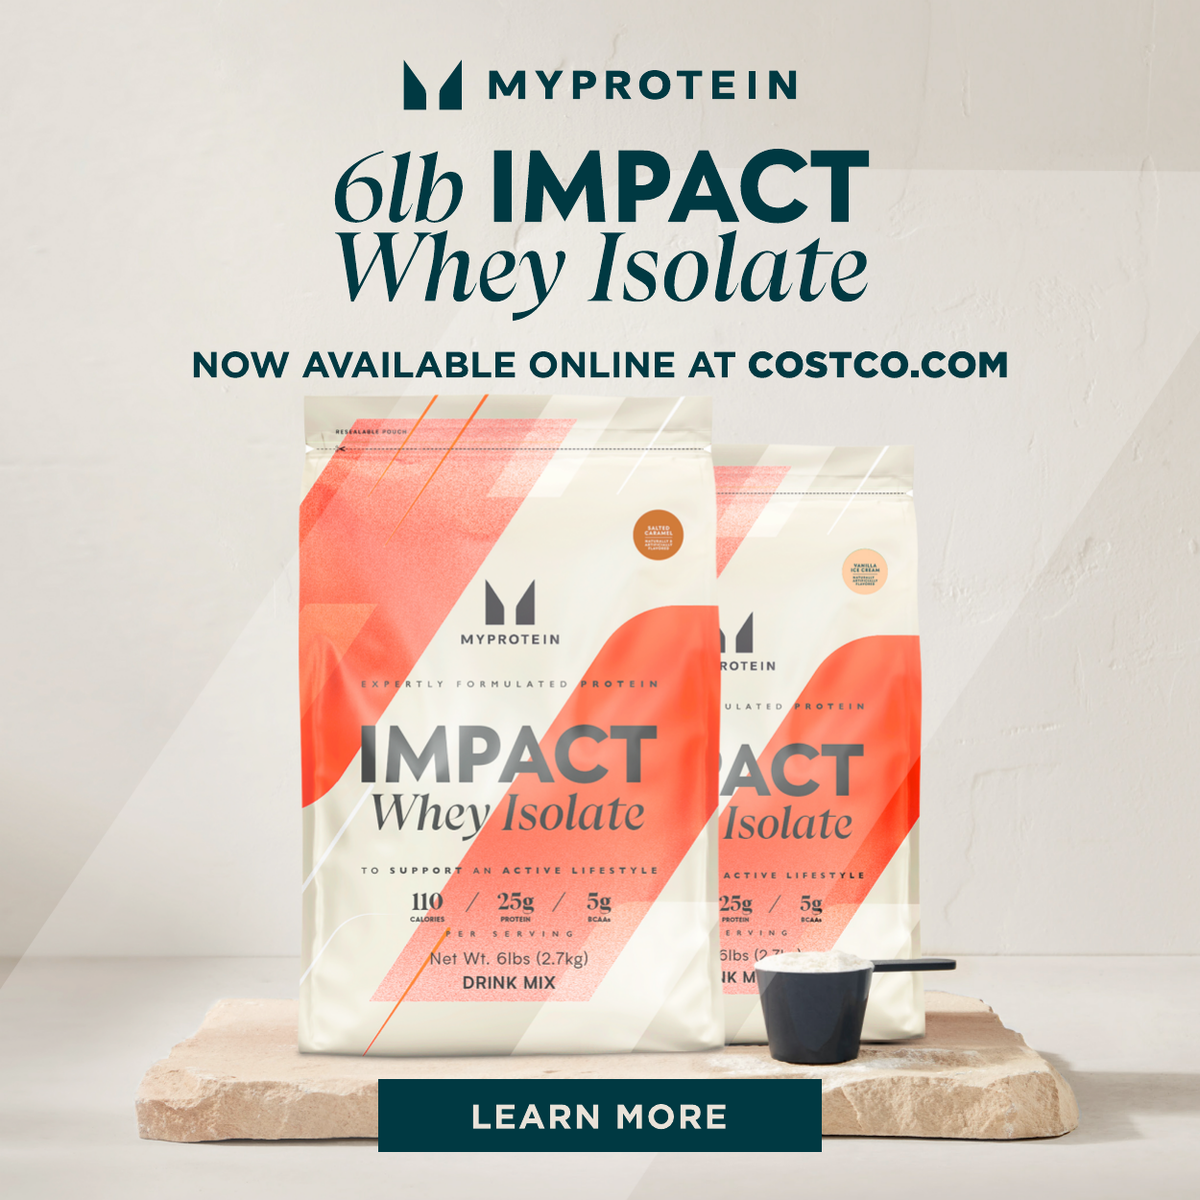 https://us.myprotein.com/thezone/supplements/impact-whey-isolate-comes-to-costco/ 